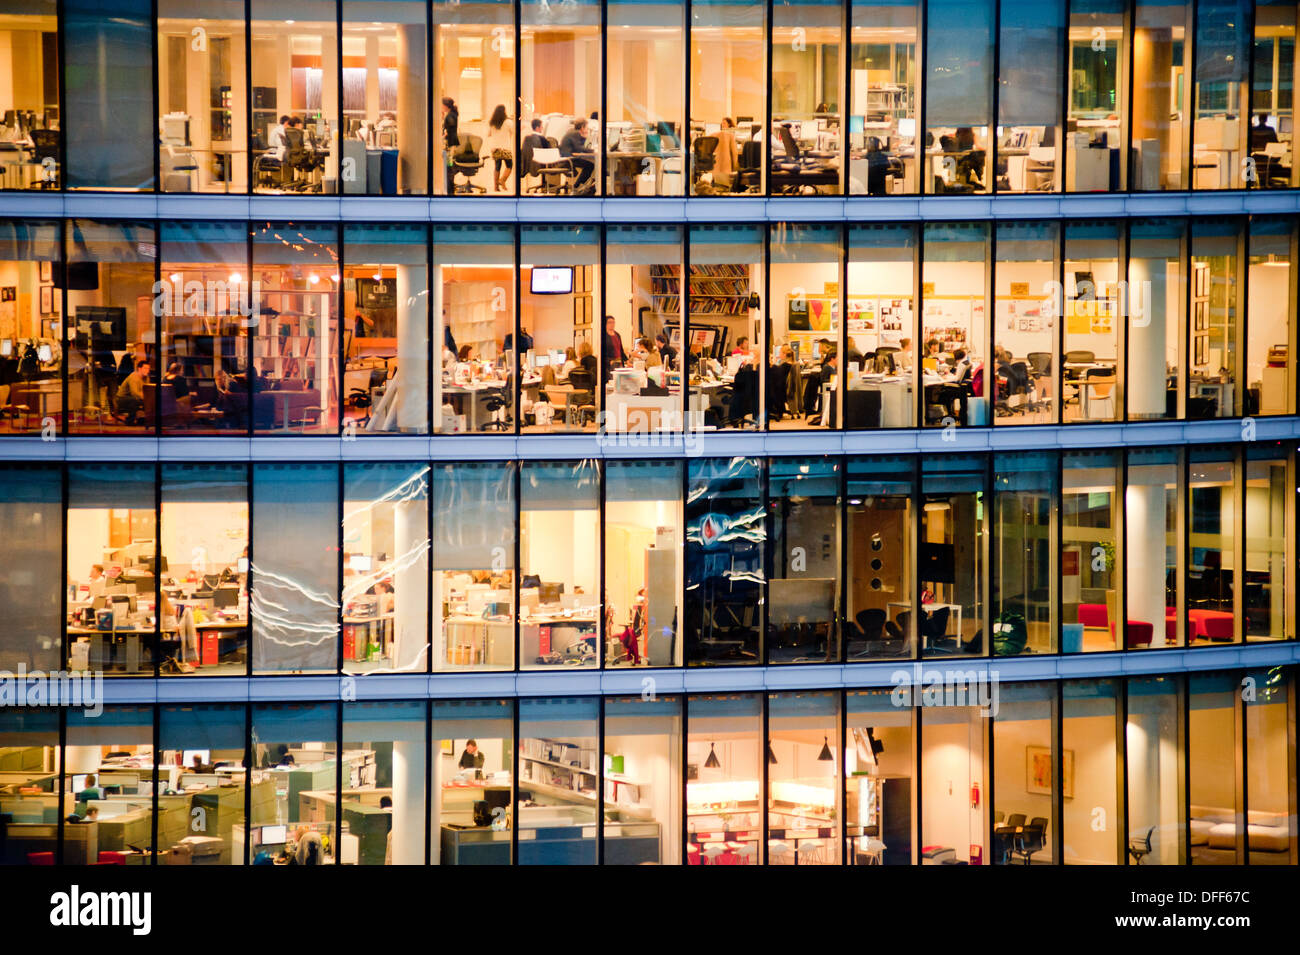 London, UK - February 2013: people work in a modern office building at dusk. Stock Photo